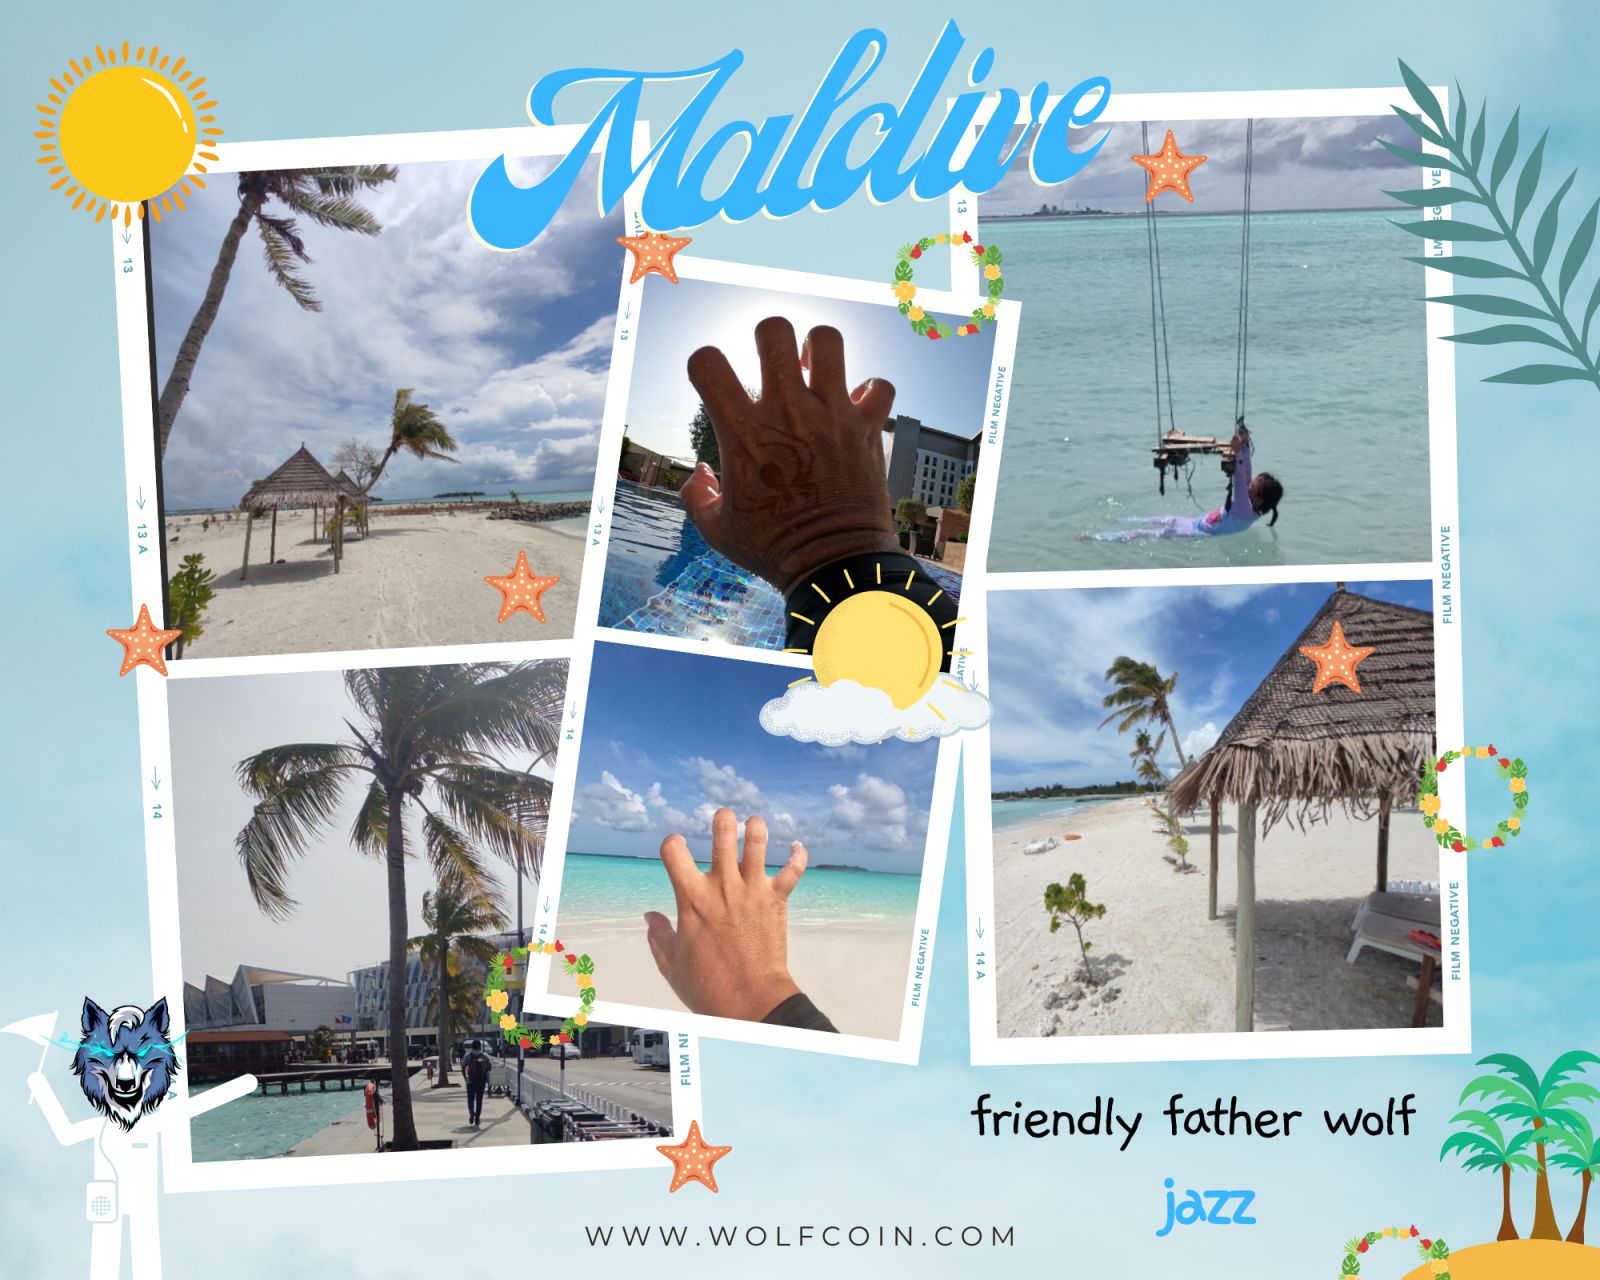 Travel to Maldive (WOLFCOIN).png.jpg